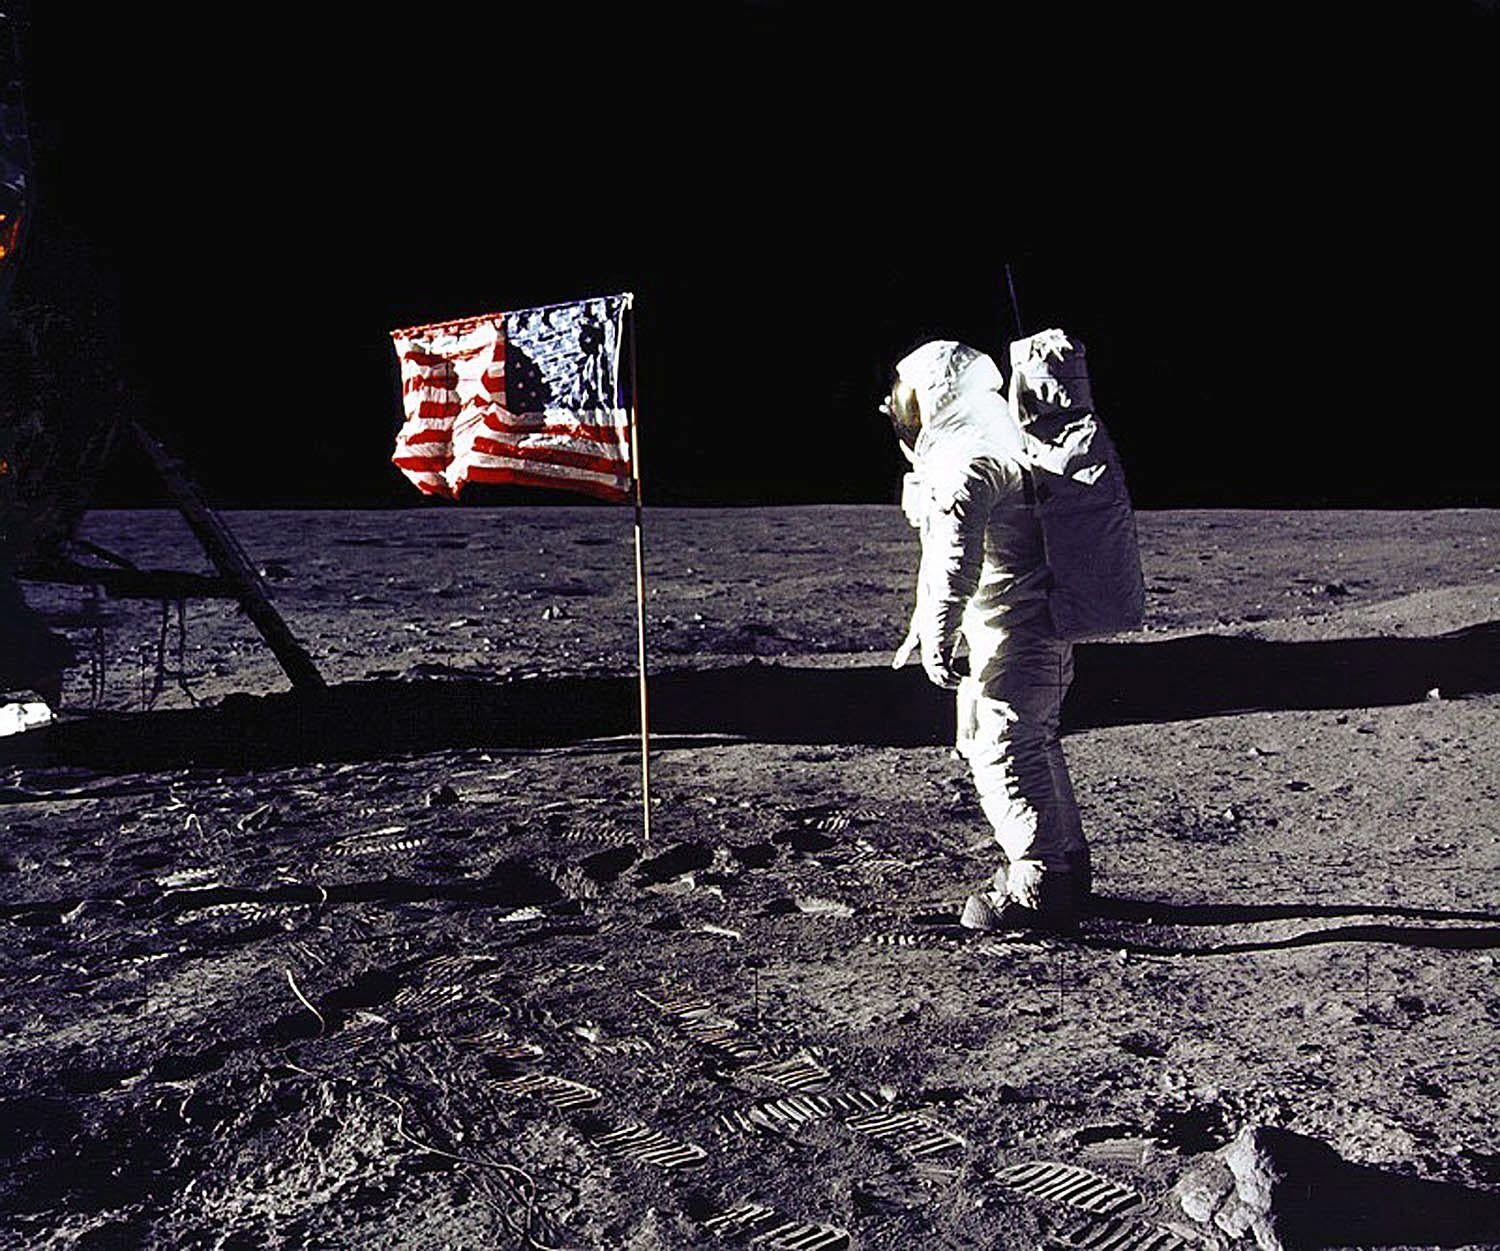 Buzz Aldrin saluting the US flag on the surface of the Moon in 1969